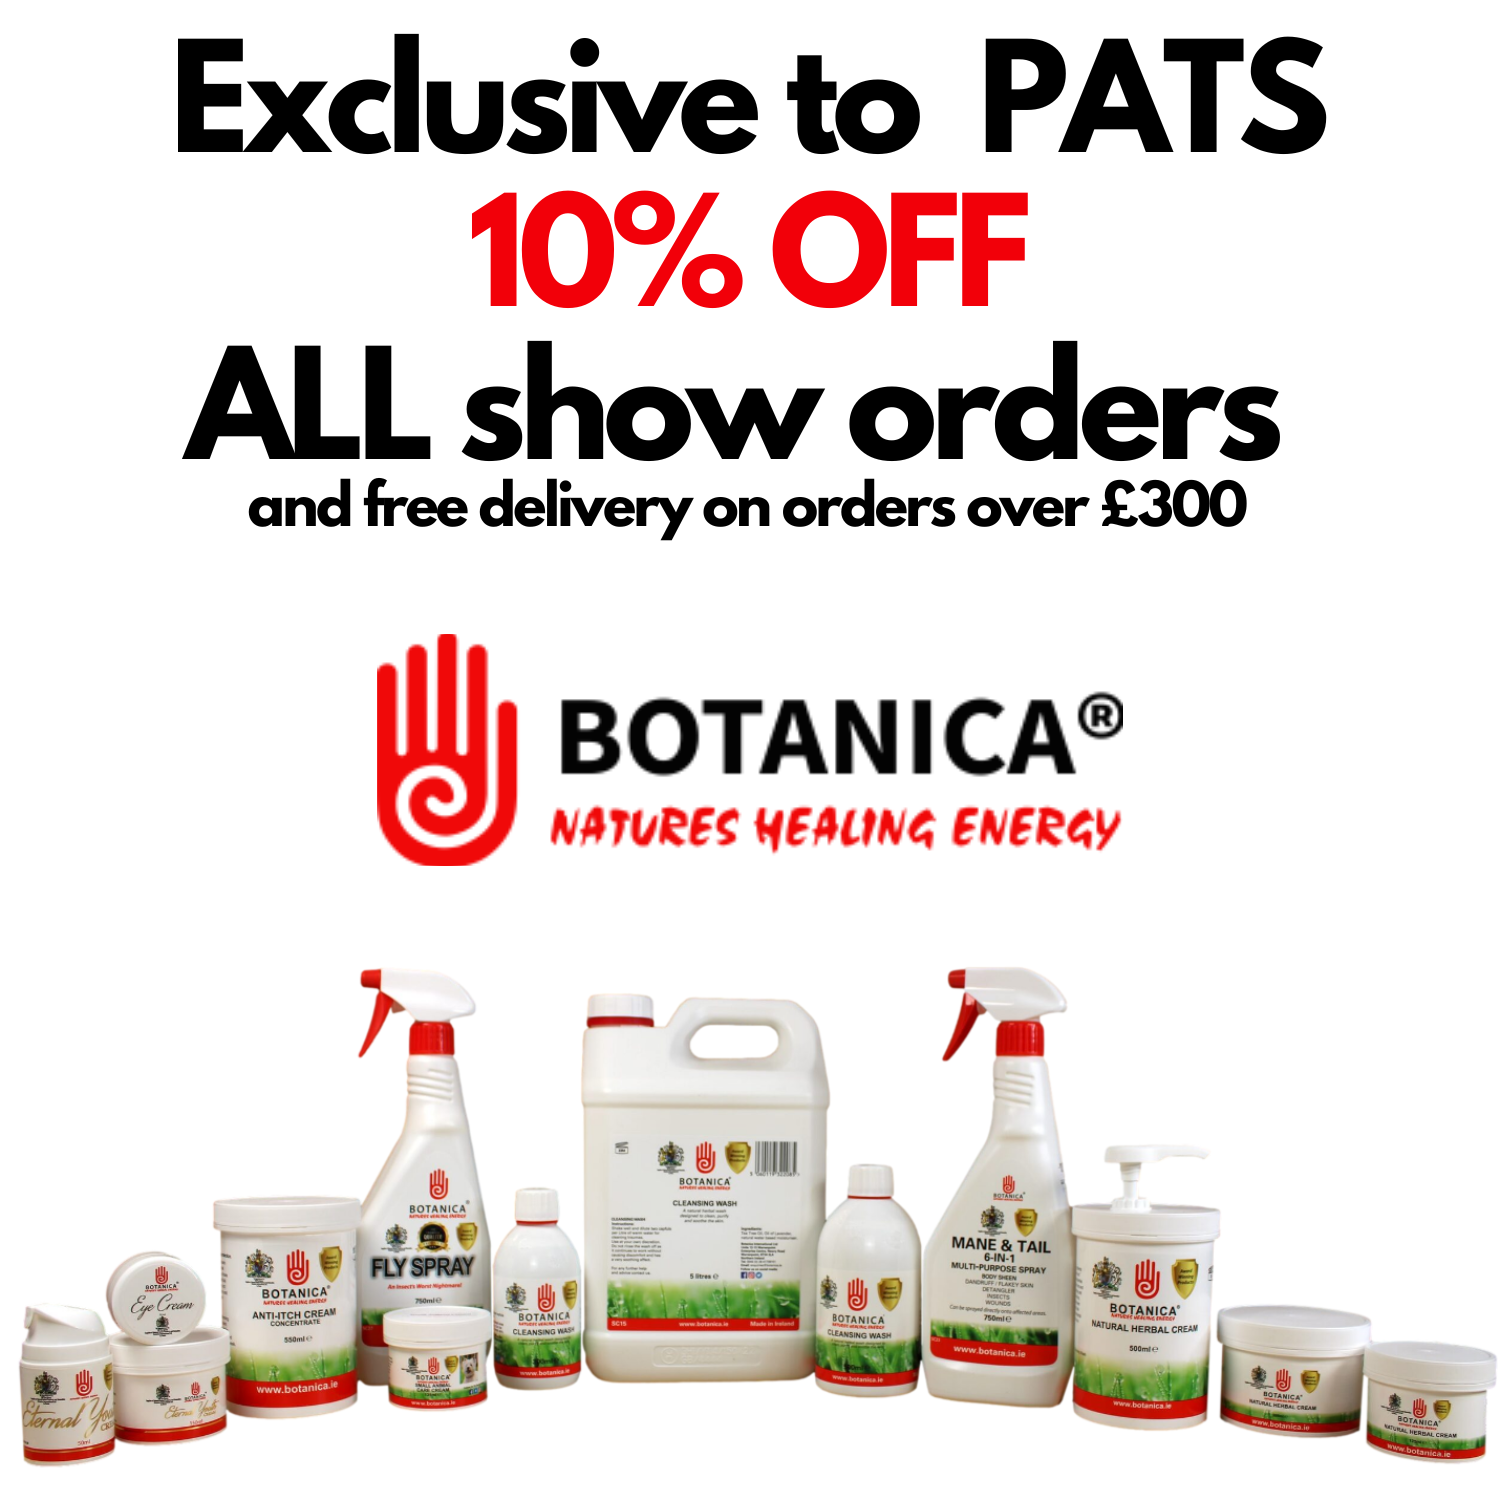 Special Offer: 10% off all orders received at PATS